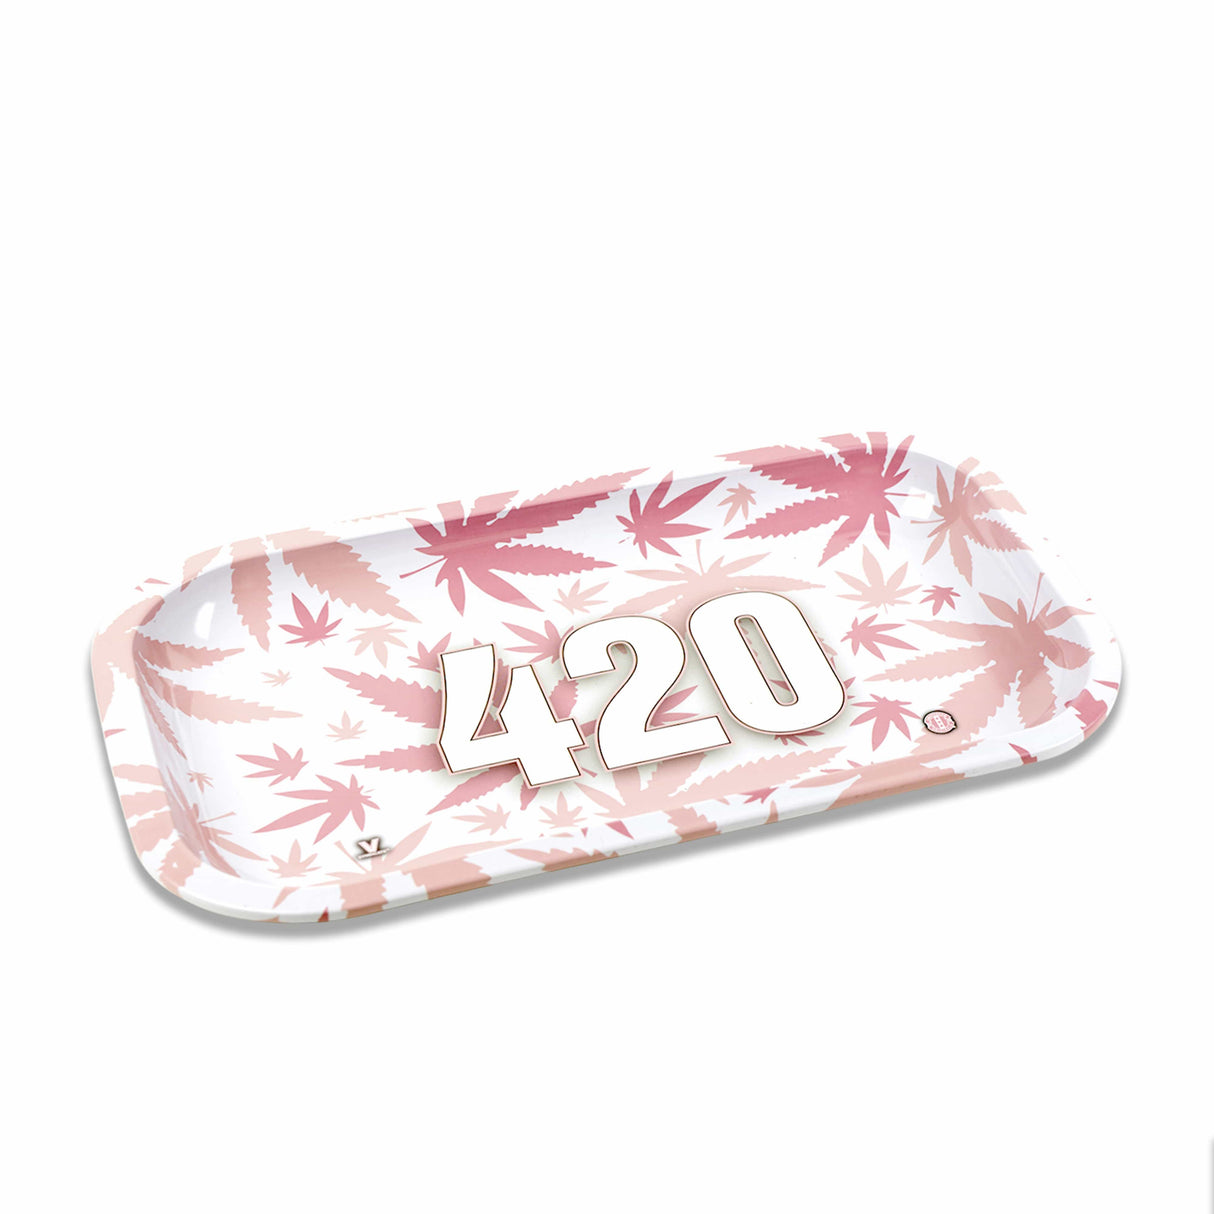 V Syndicate 420 Pink Metal Rollin' Tray with cannabis leaf design, top view on white background